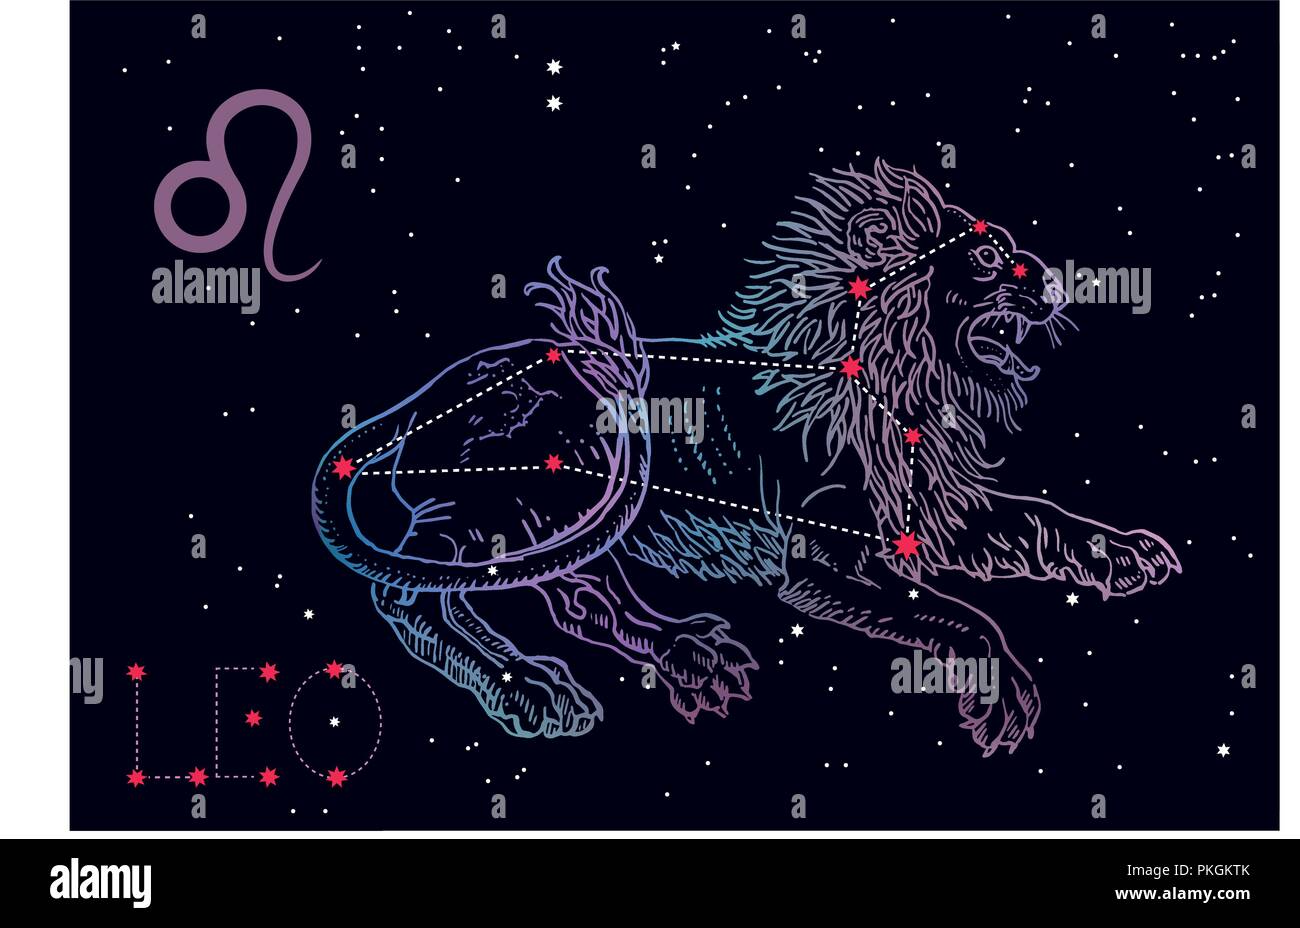 Leo zodiac sign and constellation. Lying lion on a cosmic blue background with stars. Horoscope astrology, astronomy, fantasy, mythology. Vintage engraving tattoo style hand drawn vector illustration. Stock Vector